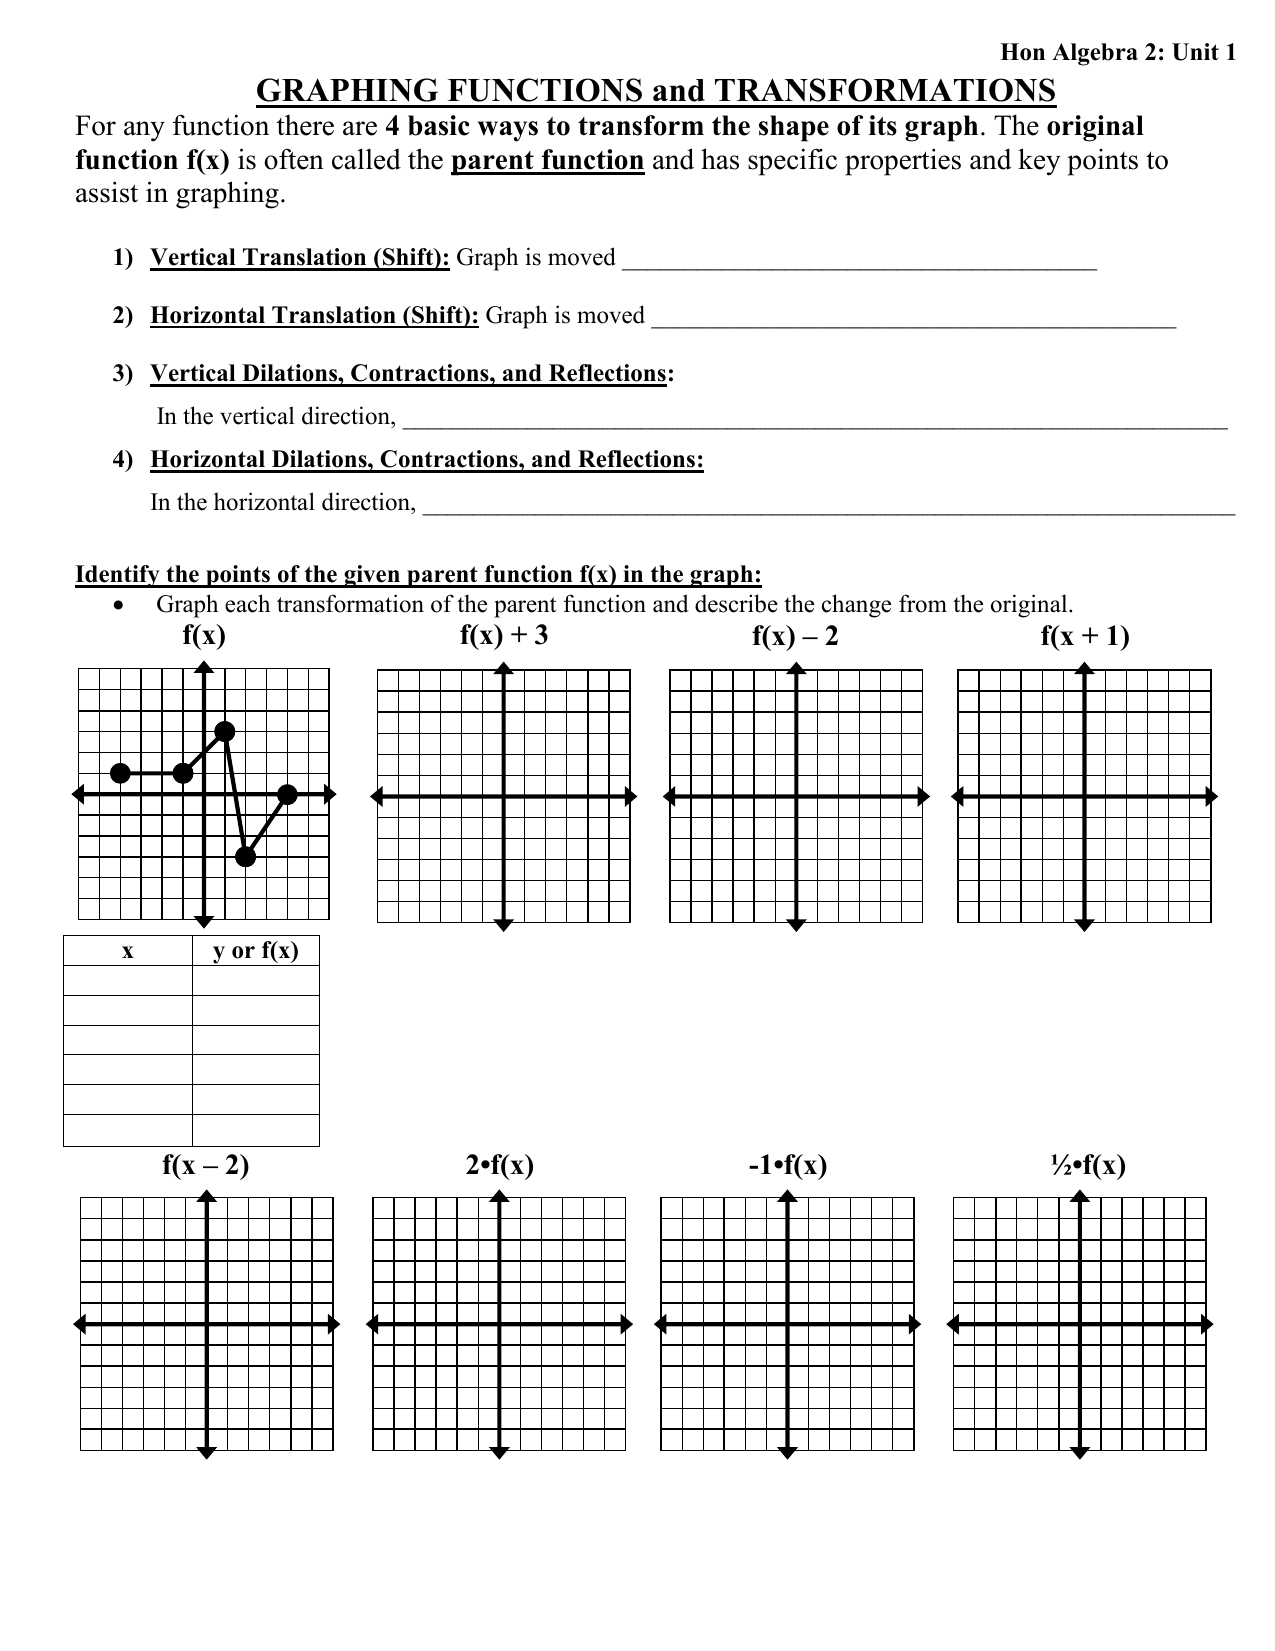 Hon Algebra 221: Unit 21 GRAPHING FUNCTIONS and Pertaining To Transformations Of Functions Worksheet